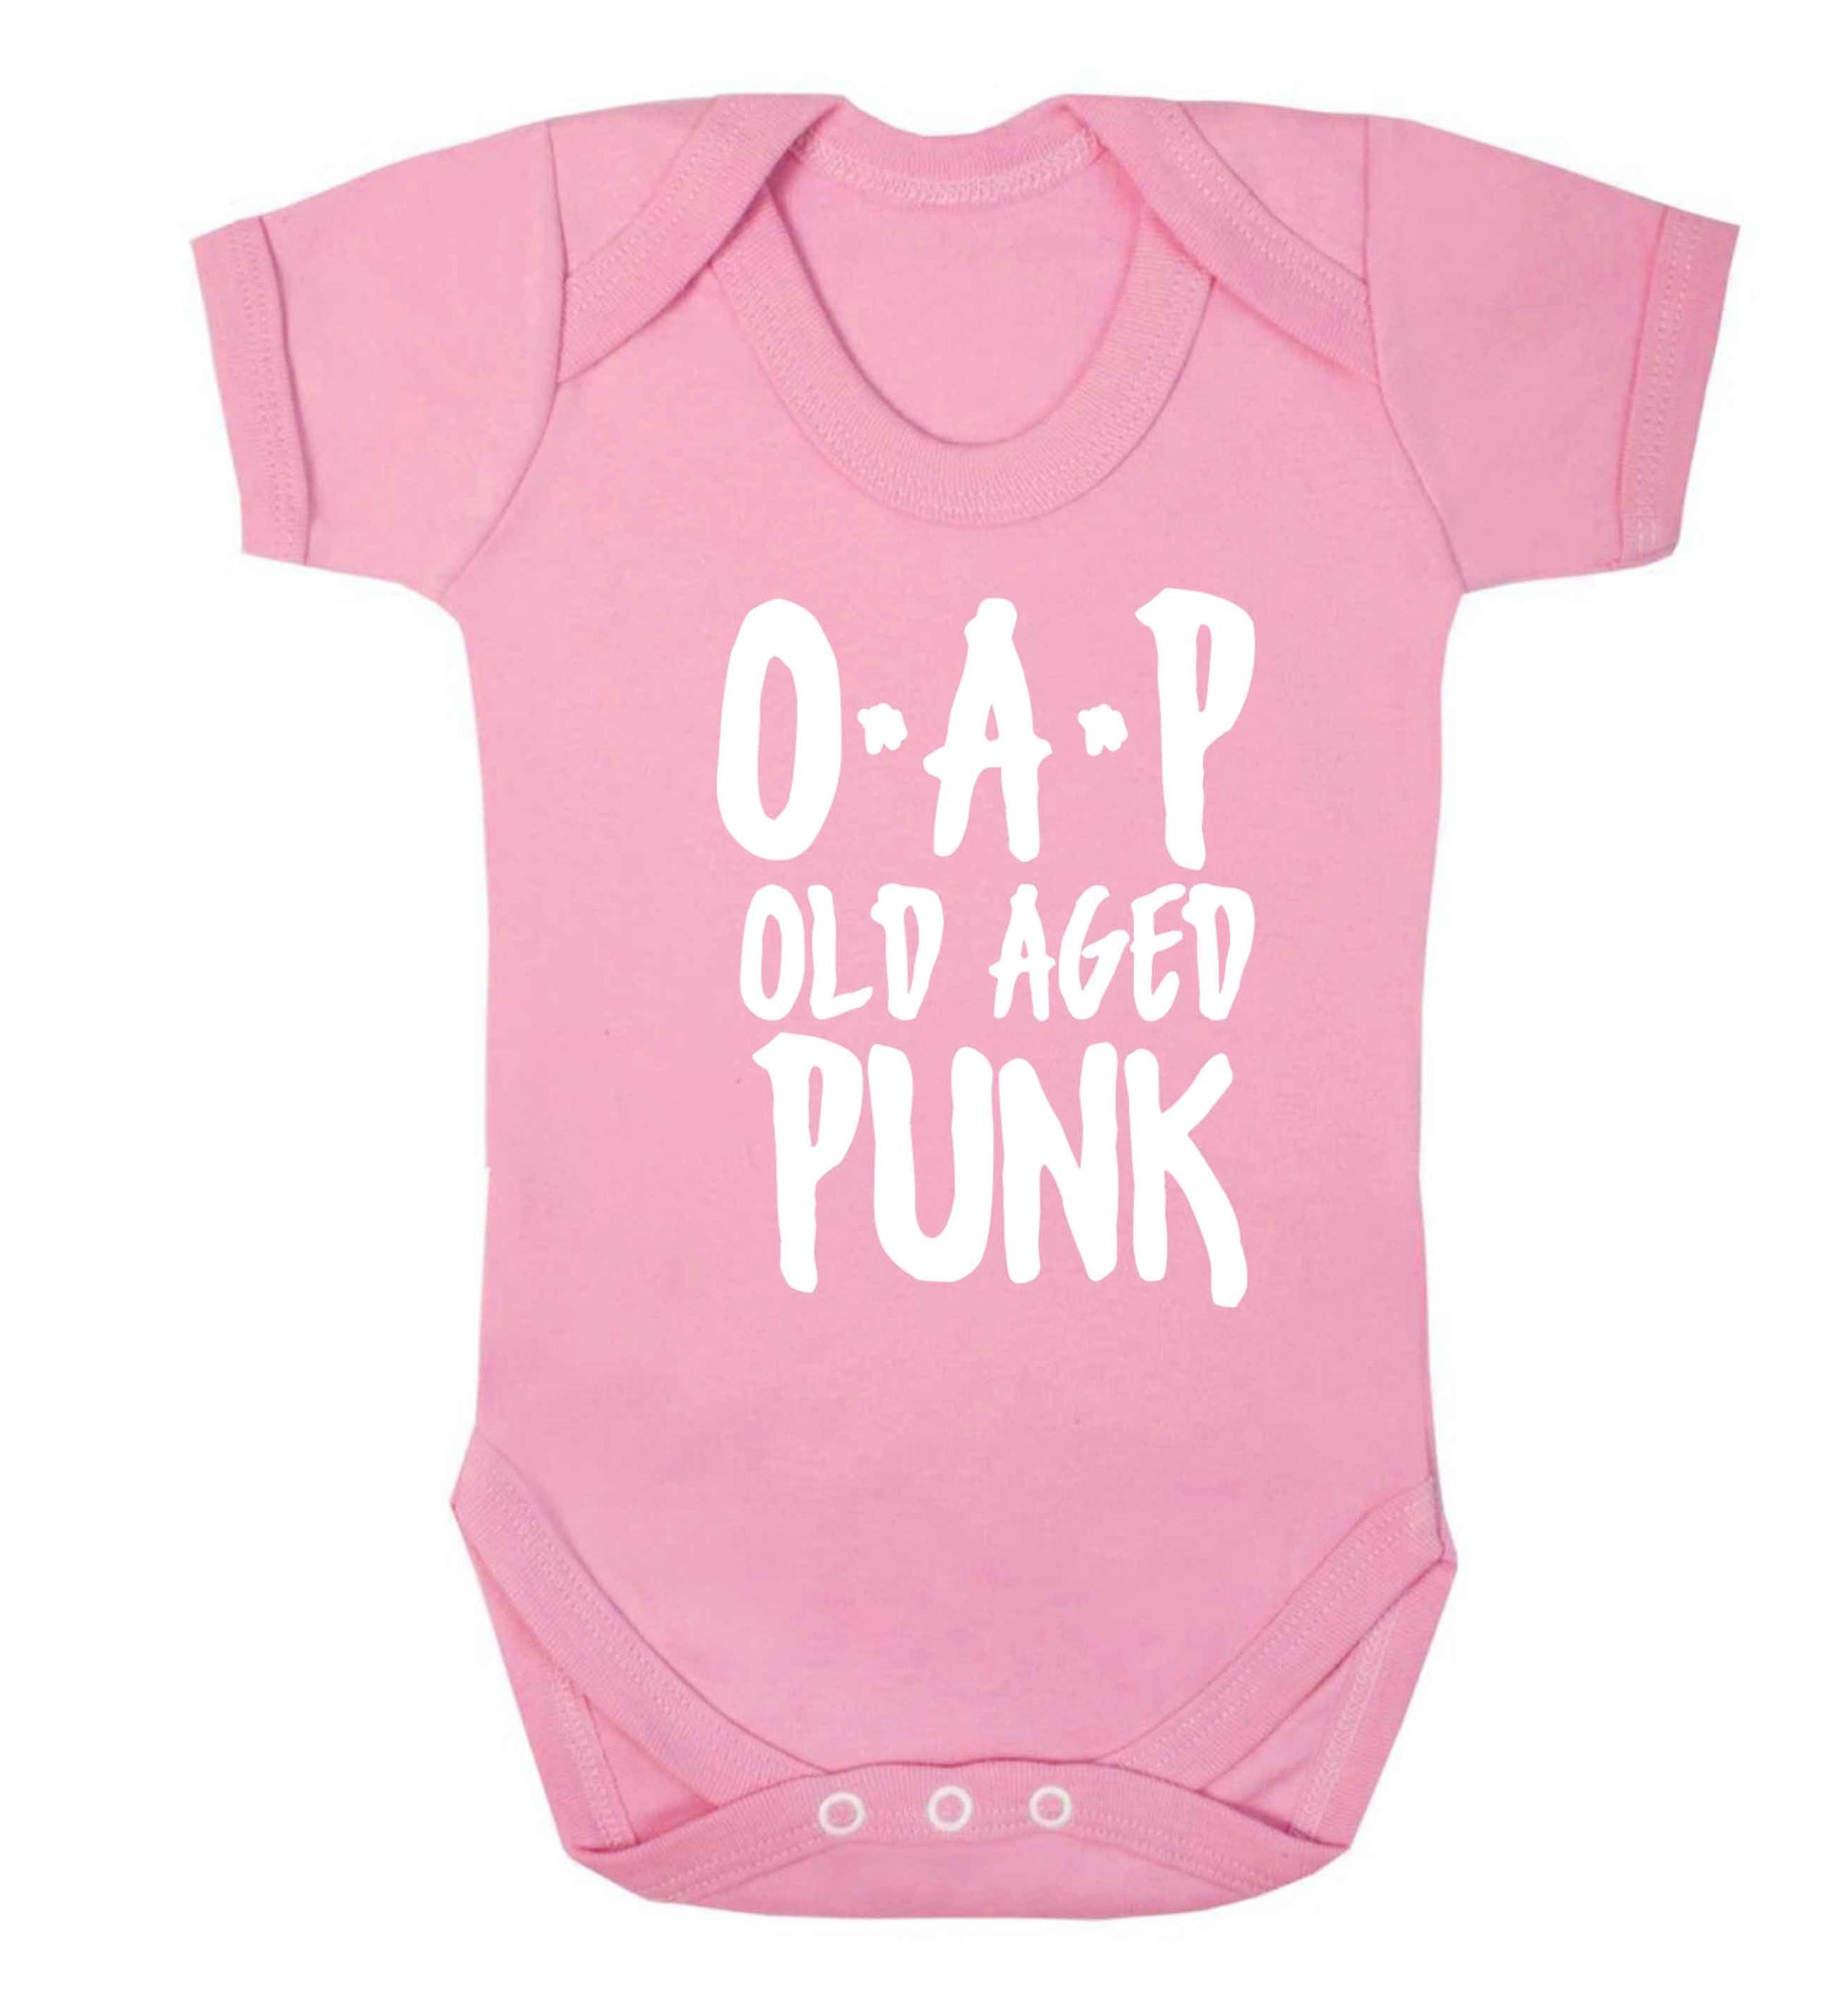 O.A.P Old Age Punk Baby Vest pale pink 18-24 months